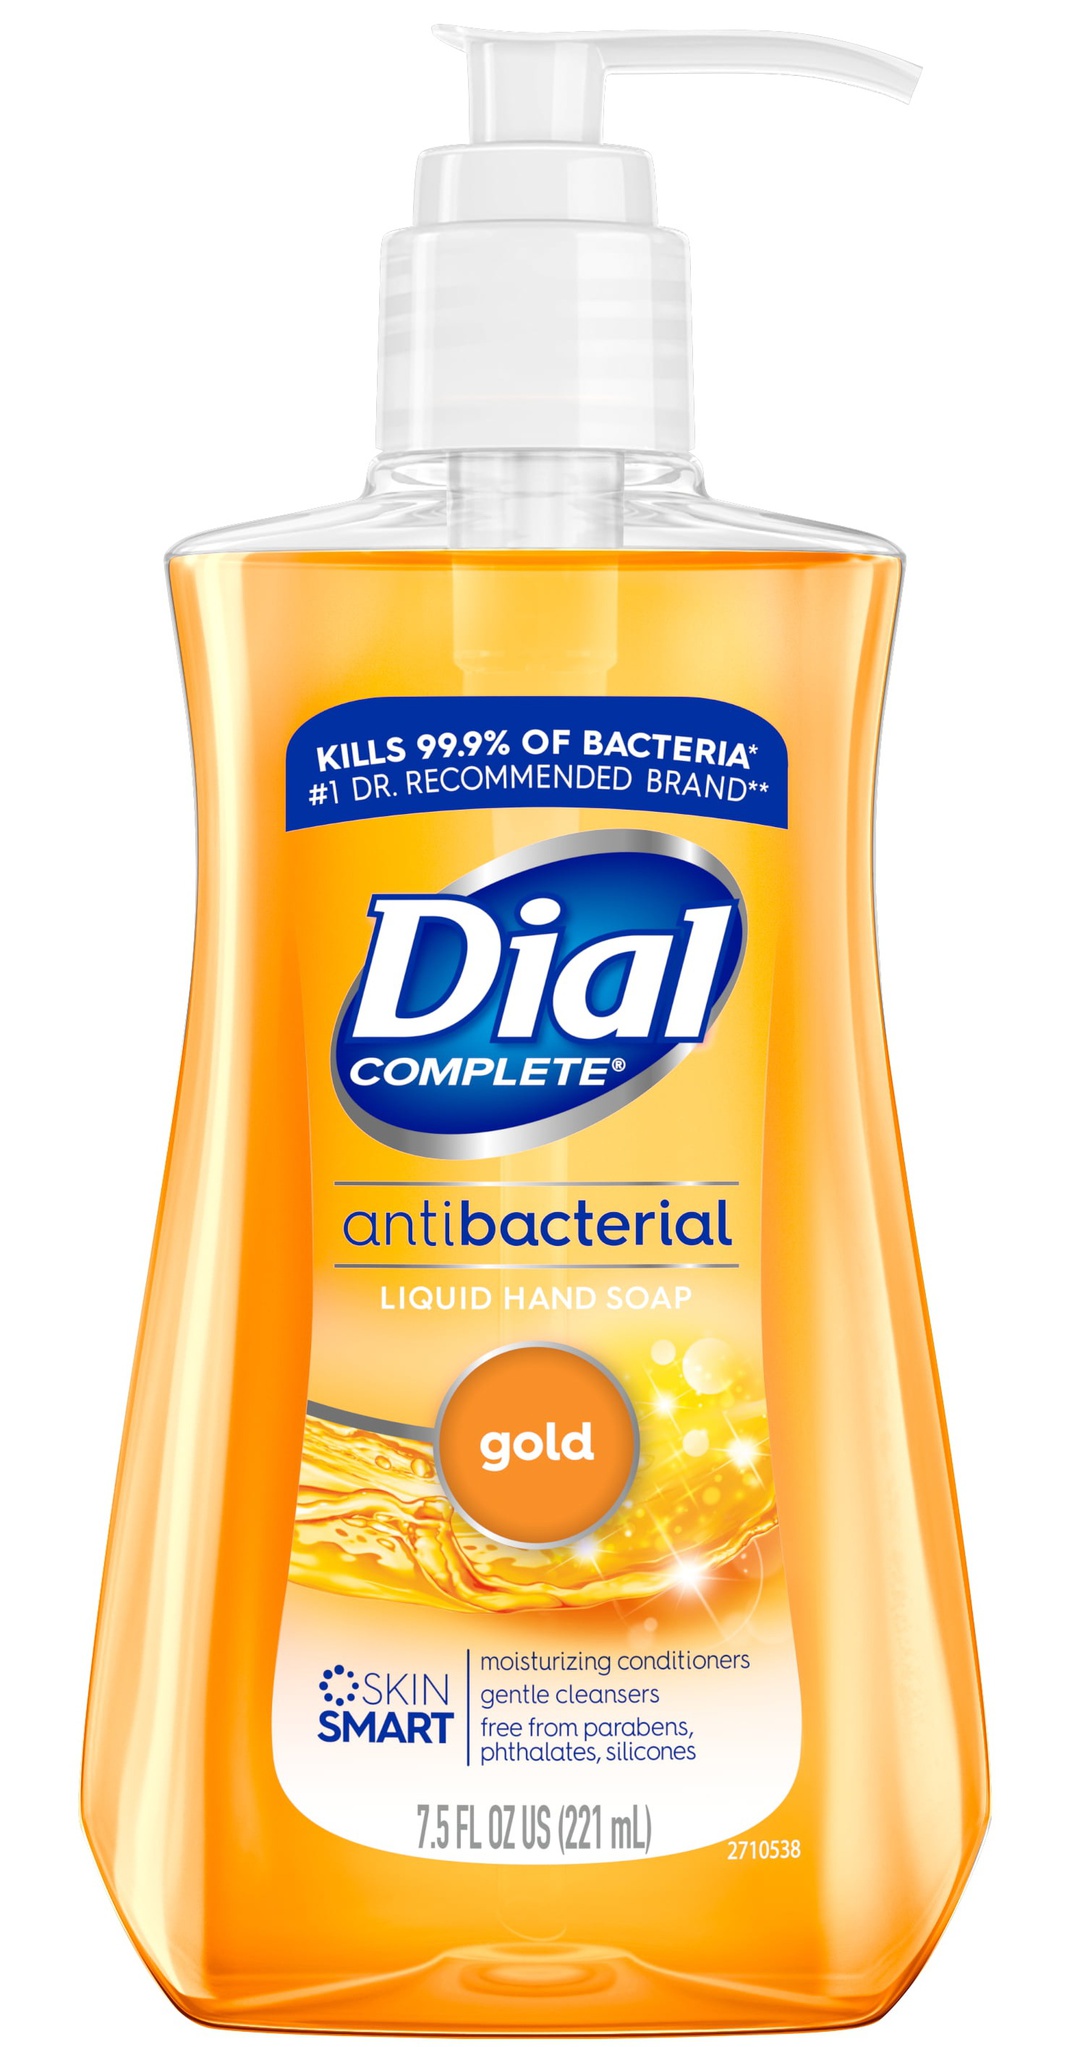 Dial Gold